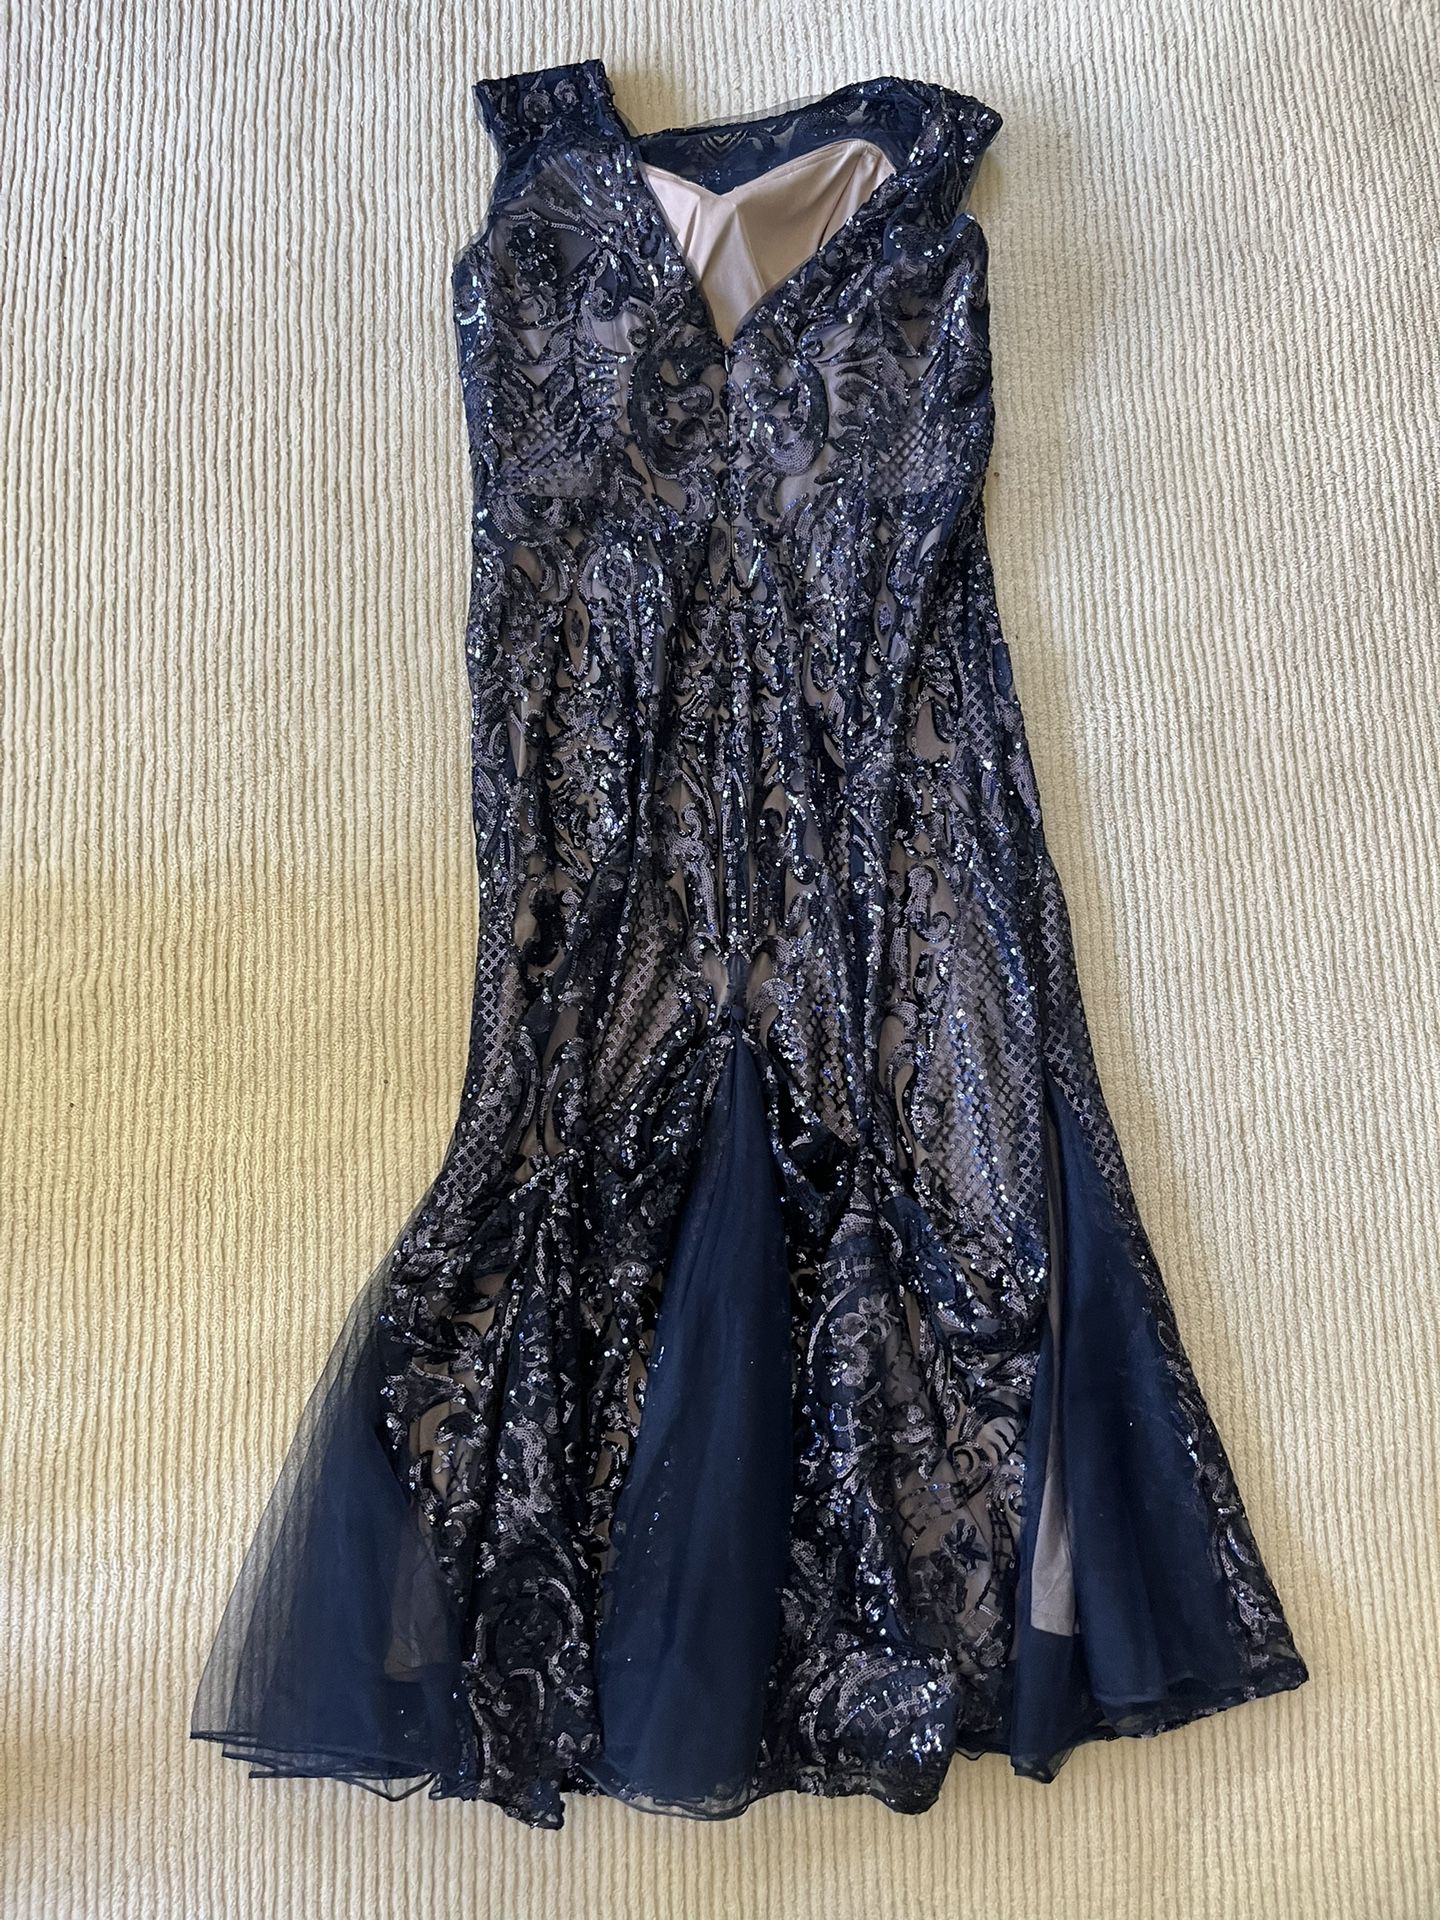 couture gown dark navy blue with bead work size 14